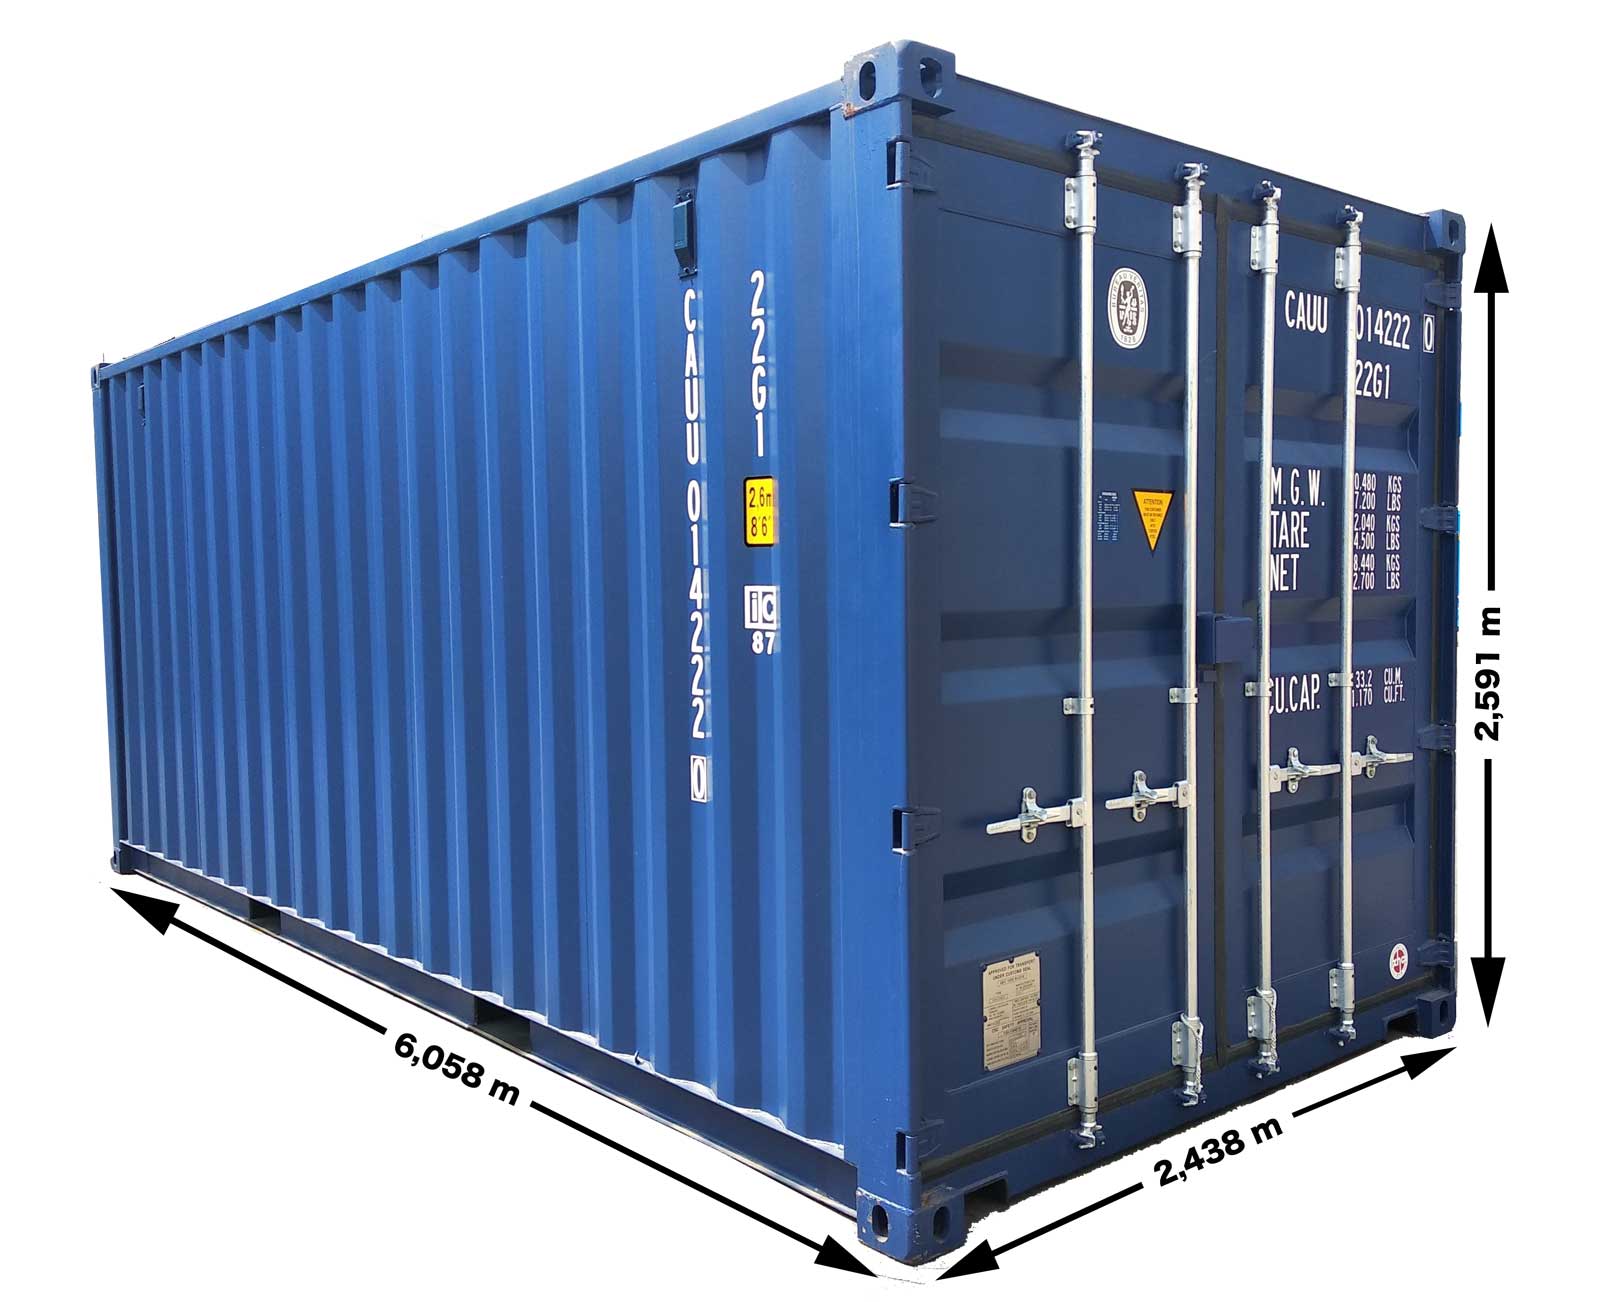 20-fods-container-maal-campas-container